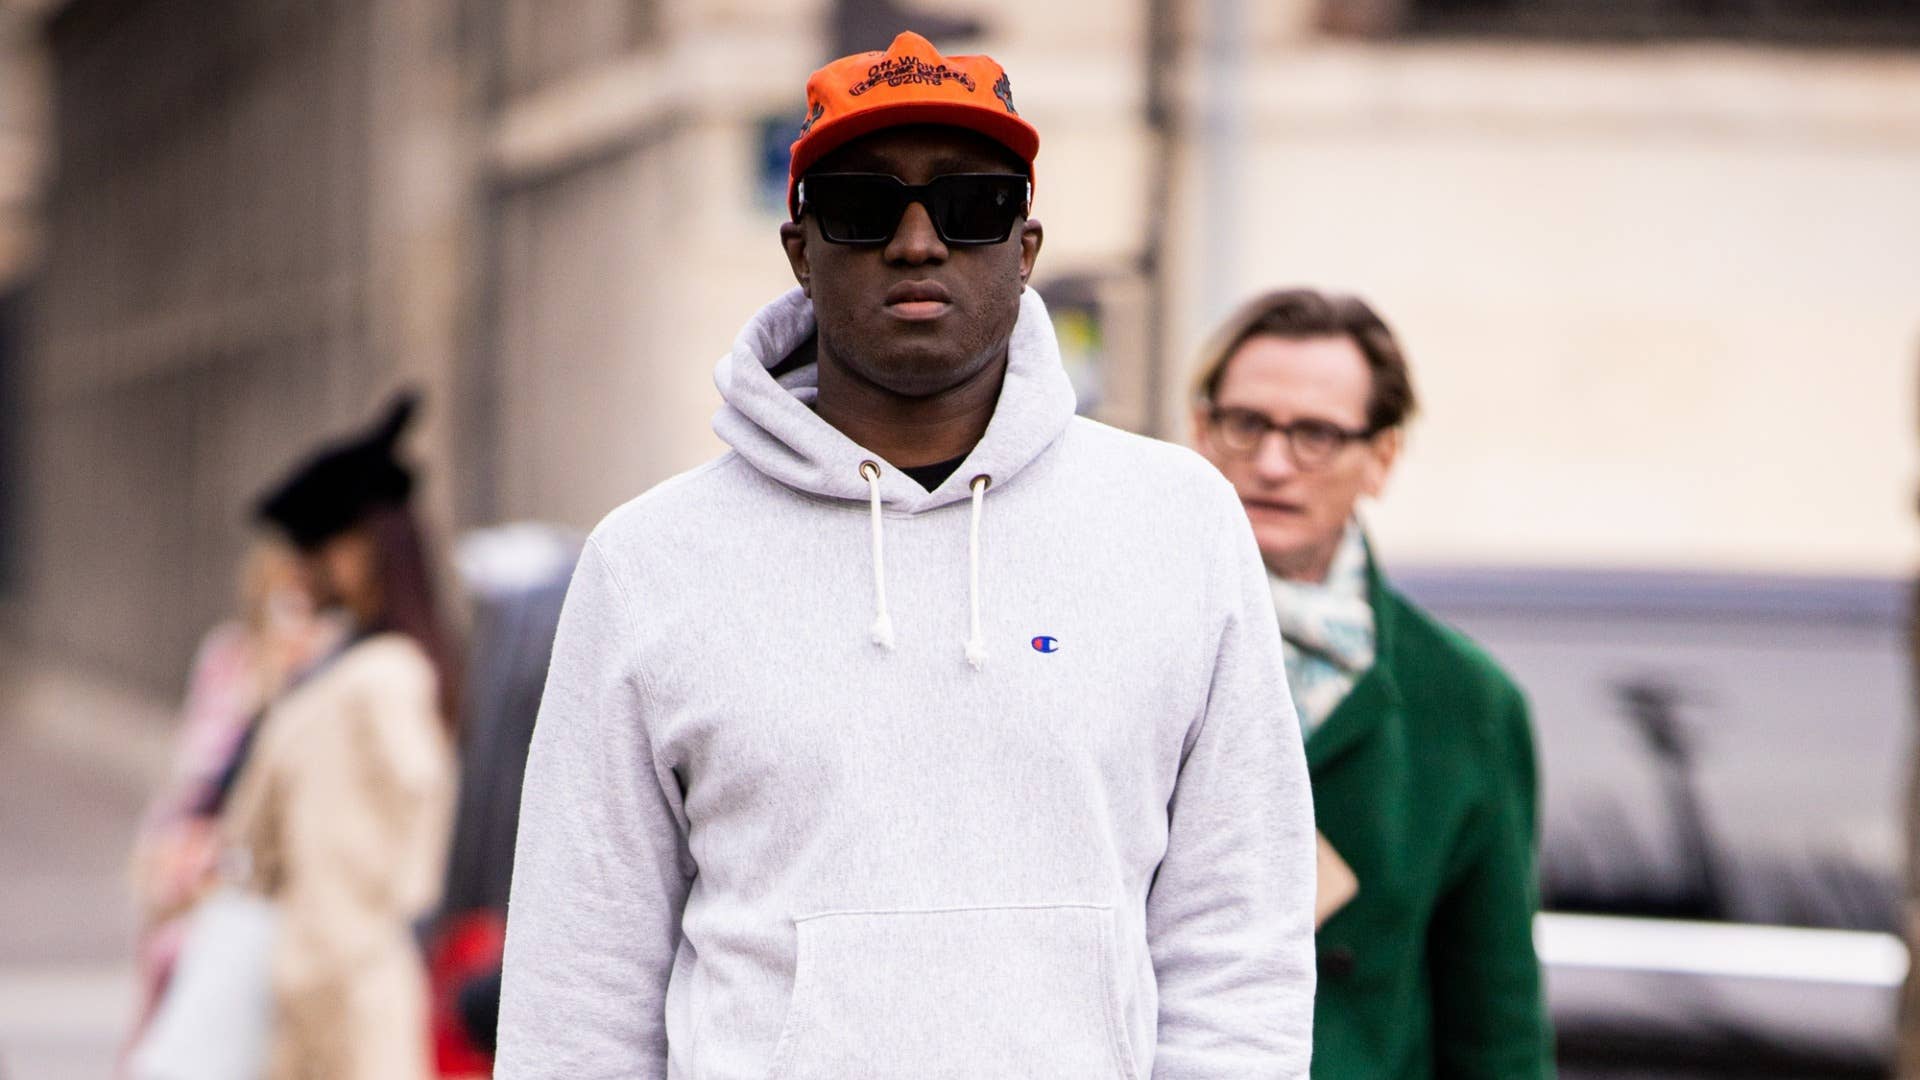 Virgil Abloh Gives Fans an Inside Look at Off-White's Creative Process With  Launch of New Instagram